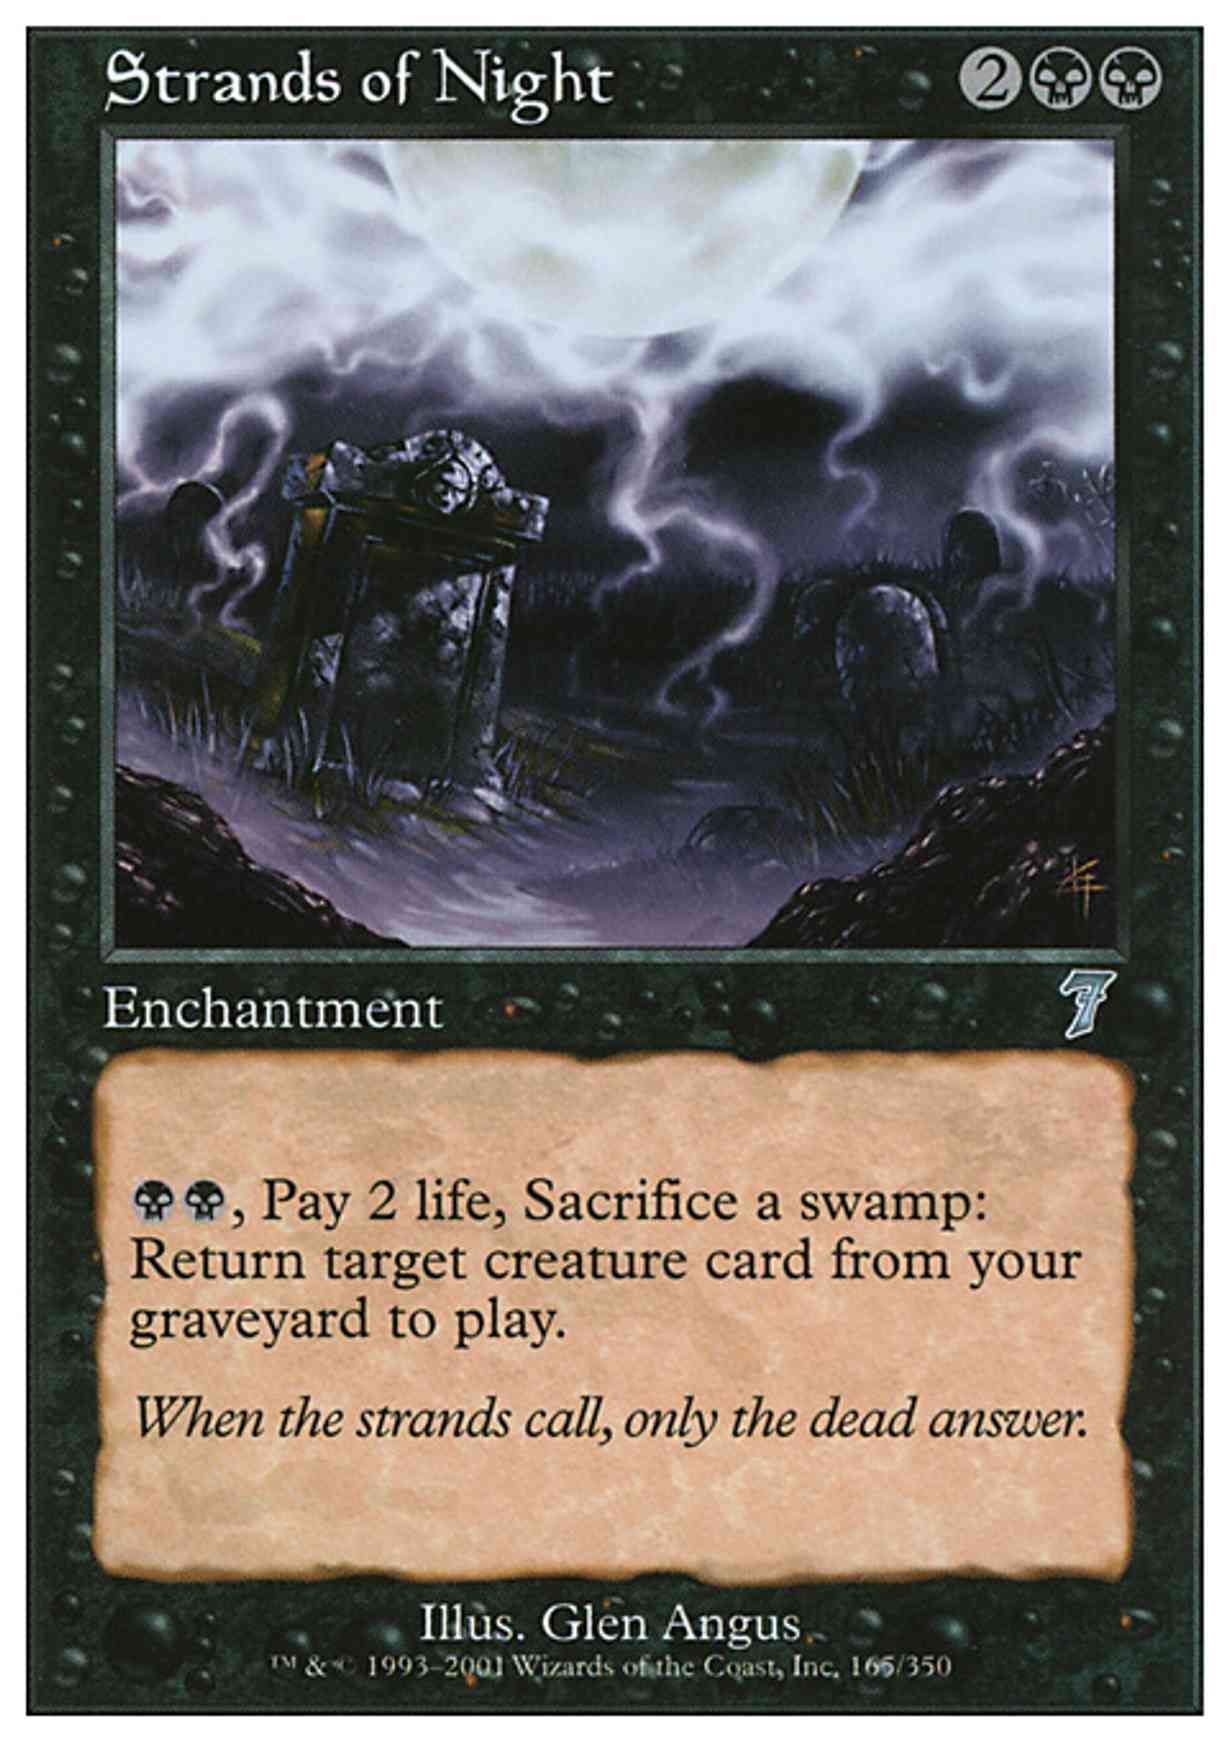 Strands of Night magic card front